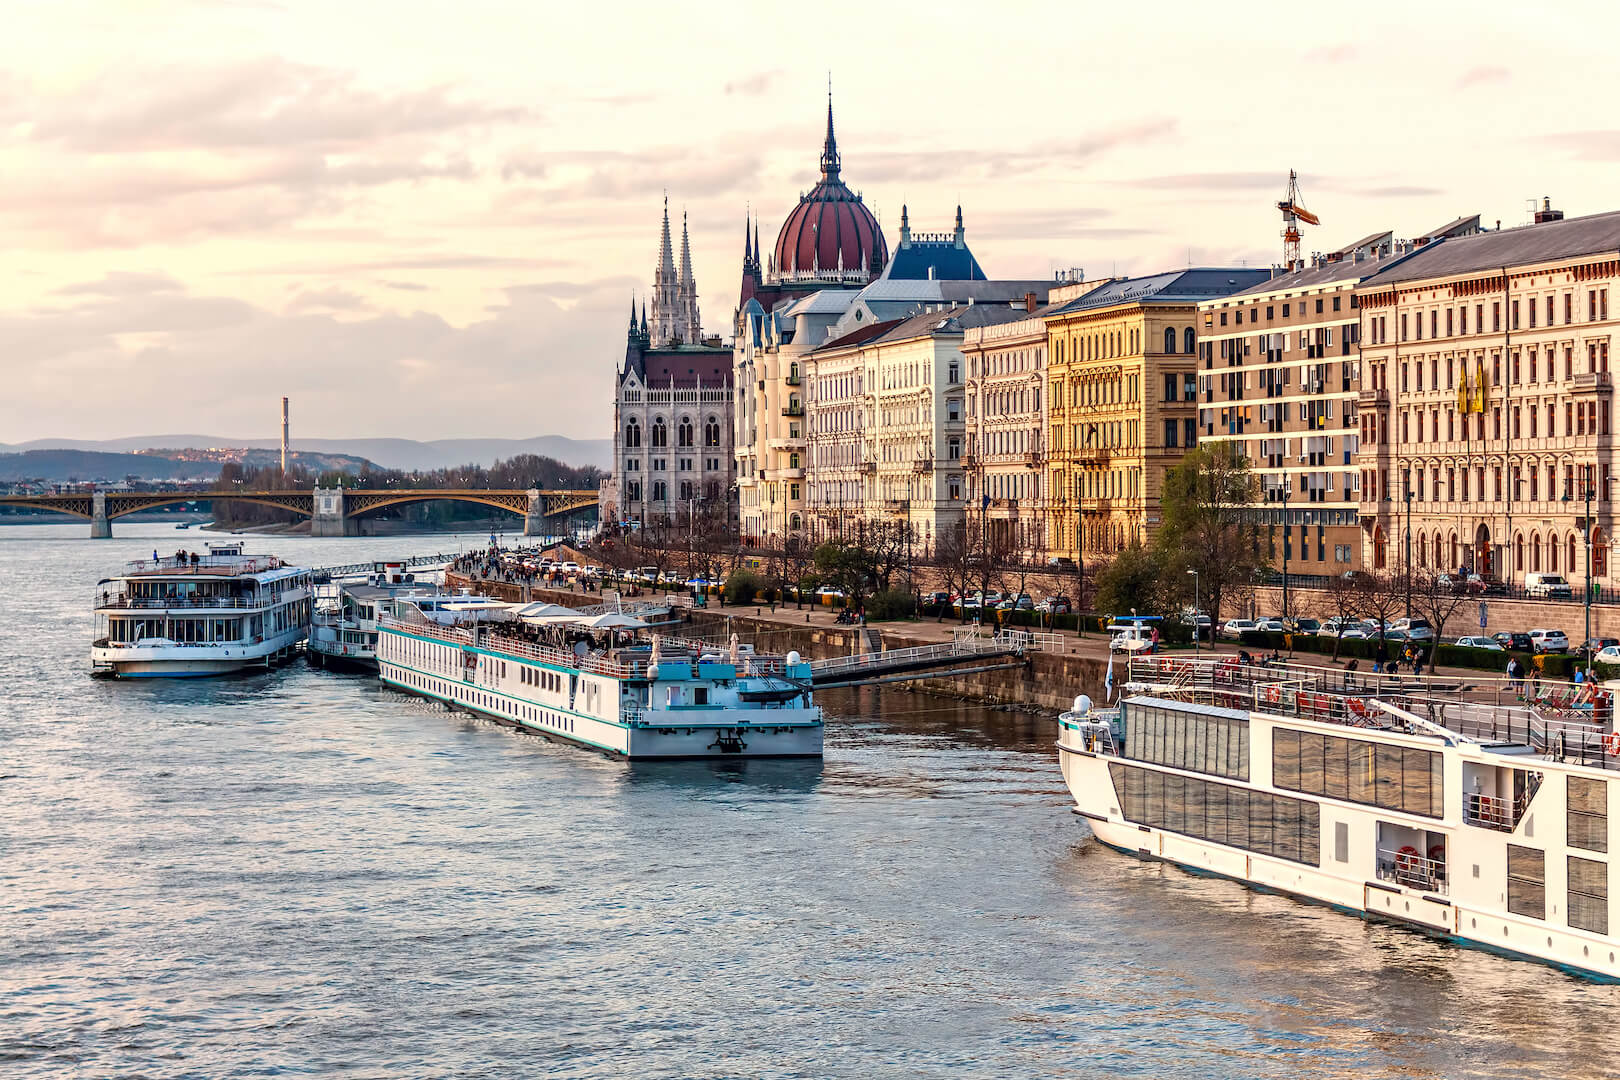 cruise ships at sunset on danube river